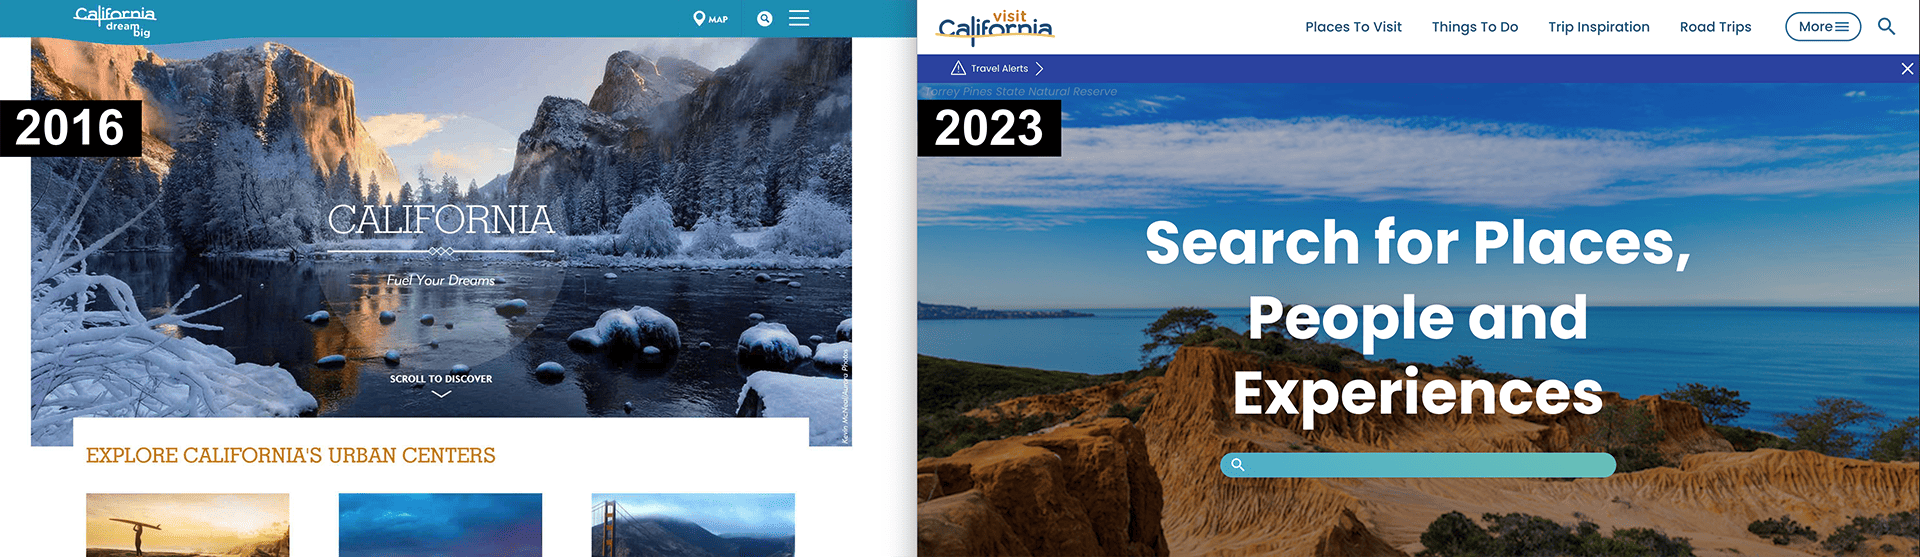 Two screenshots of the Visit California website from 2016 and 2023 positioned next to each other.